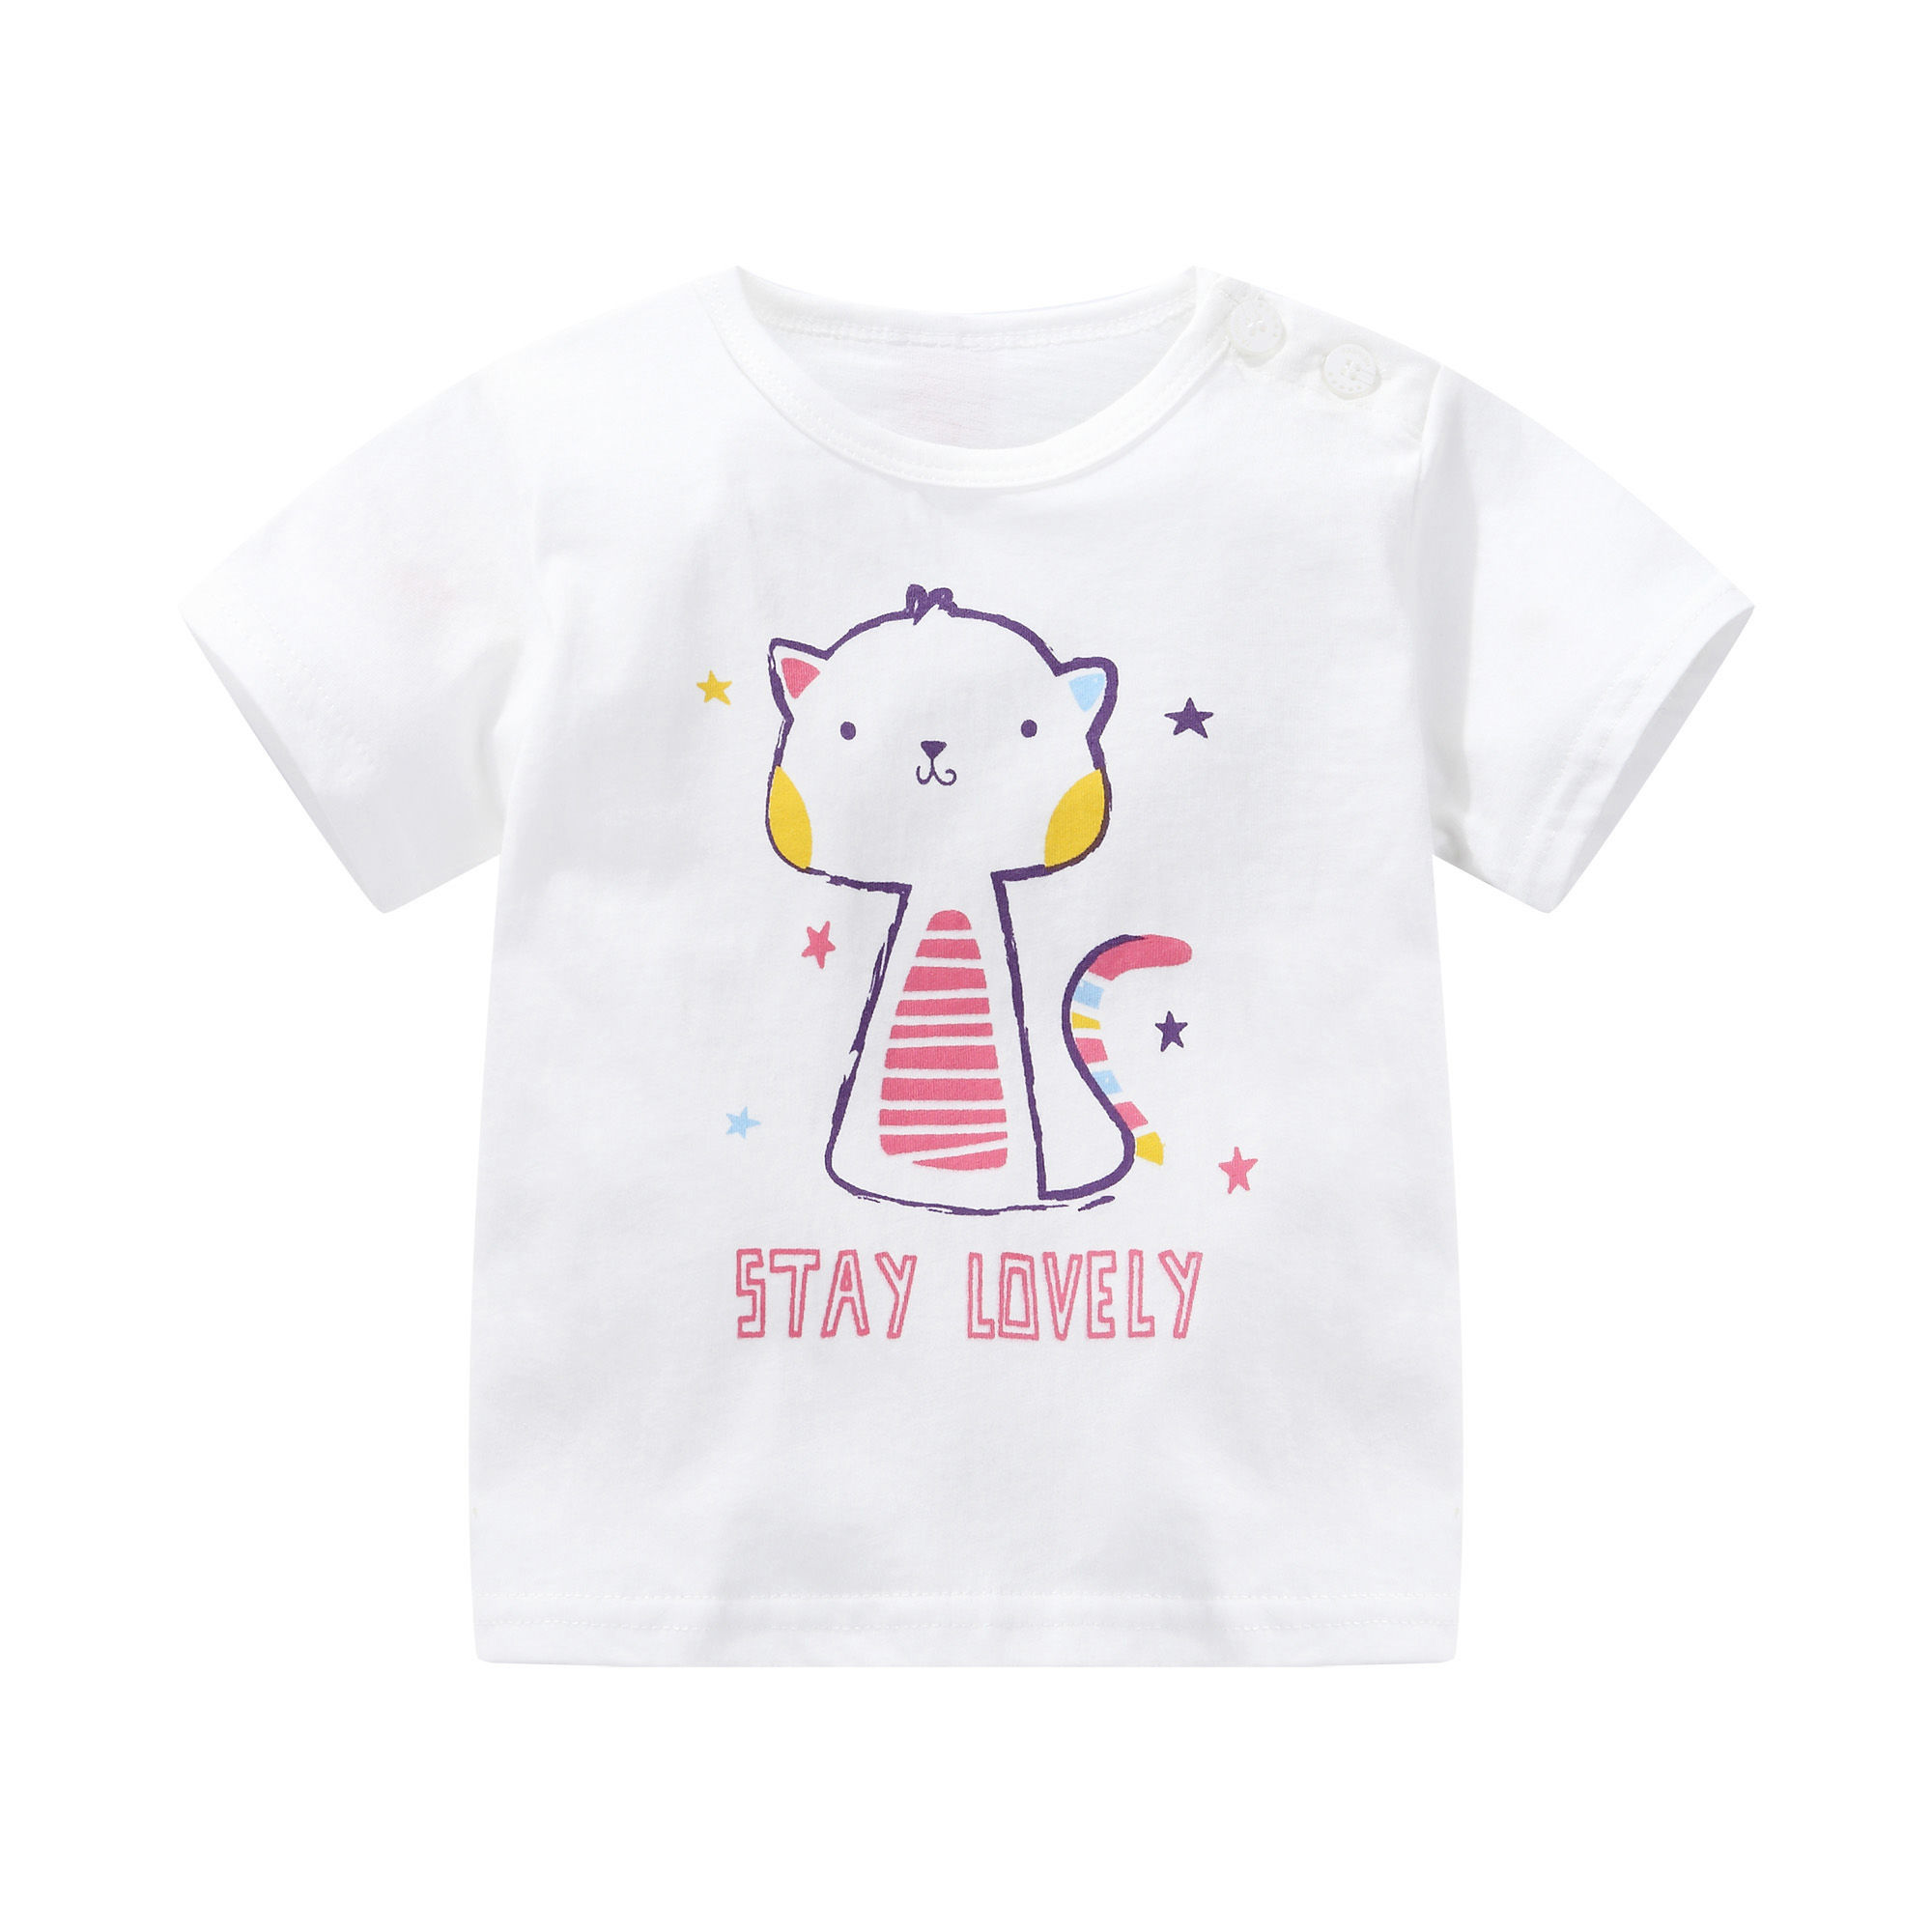 100% cotton tee for girls and boy | white tee with cat print for kids | white tee stay lovely